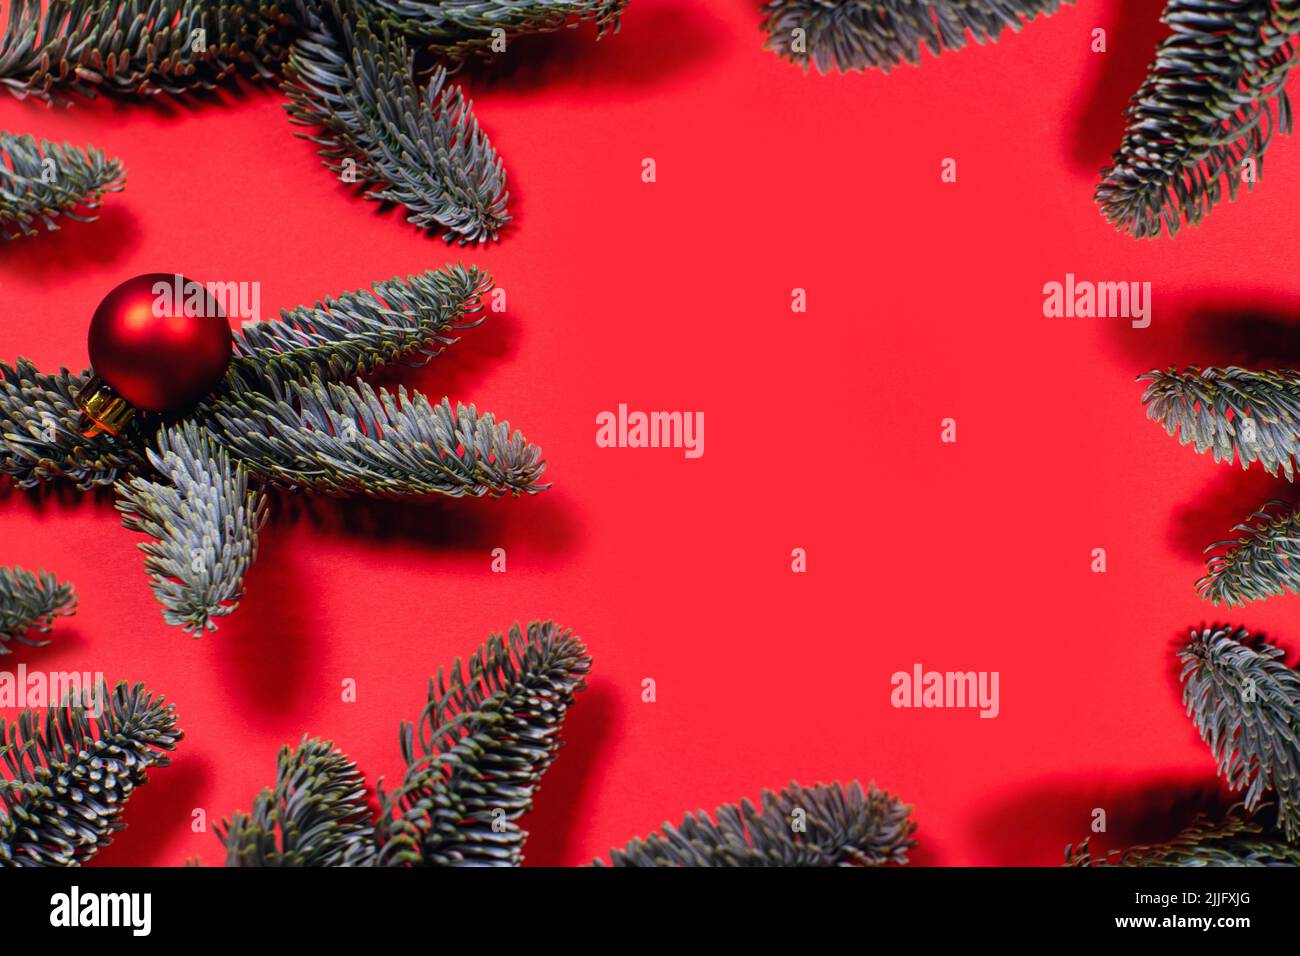 Photo with red Christmas balls on fir branches. Color background with space for text in center. Stock Photo